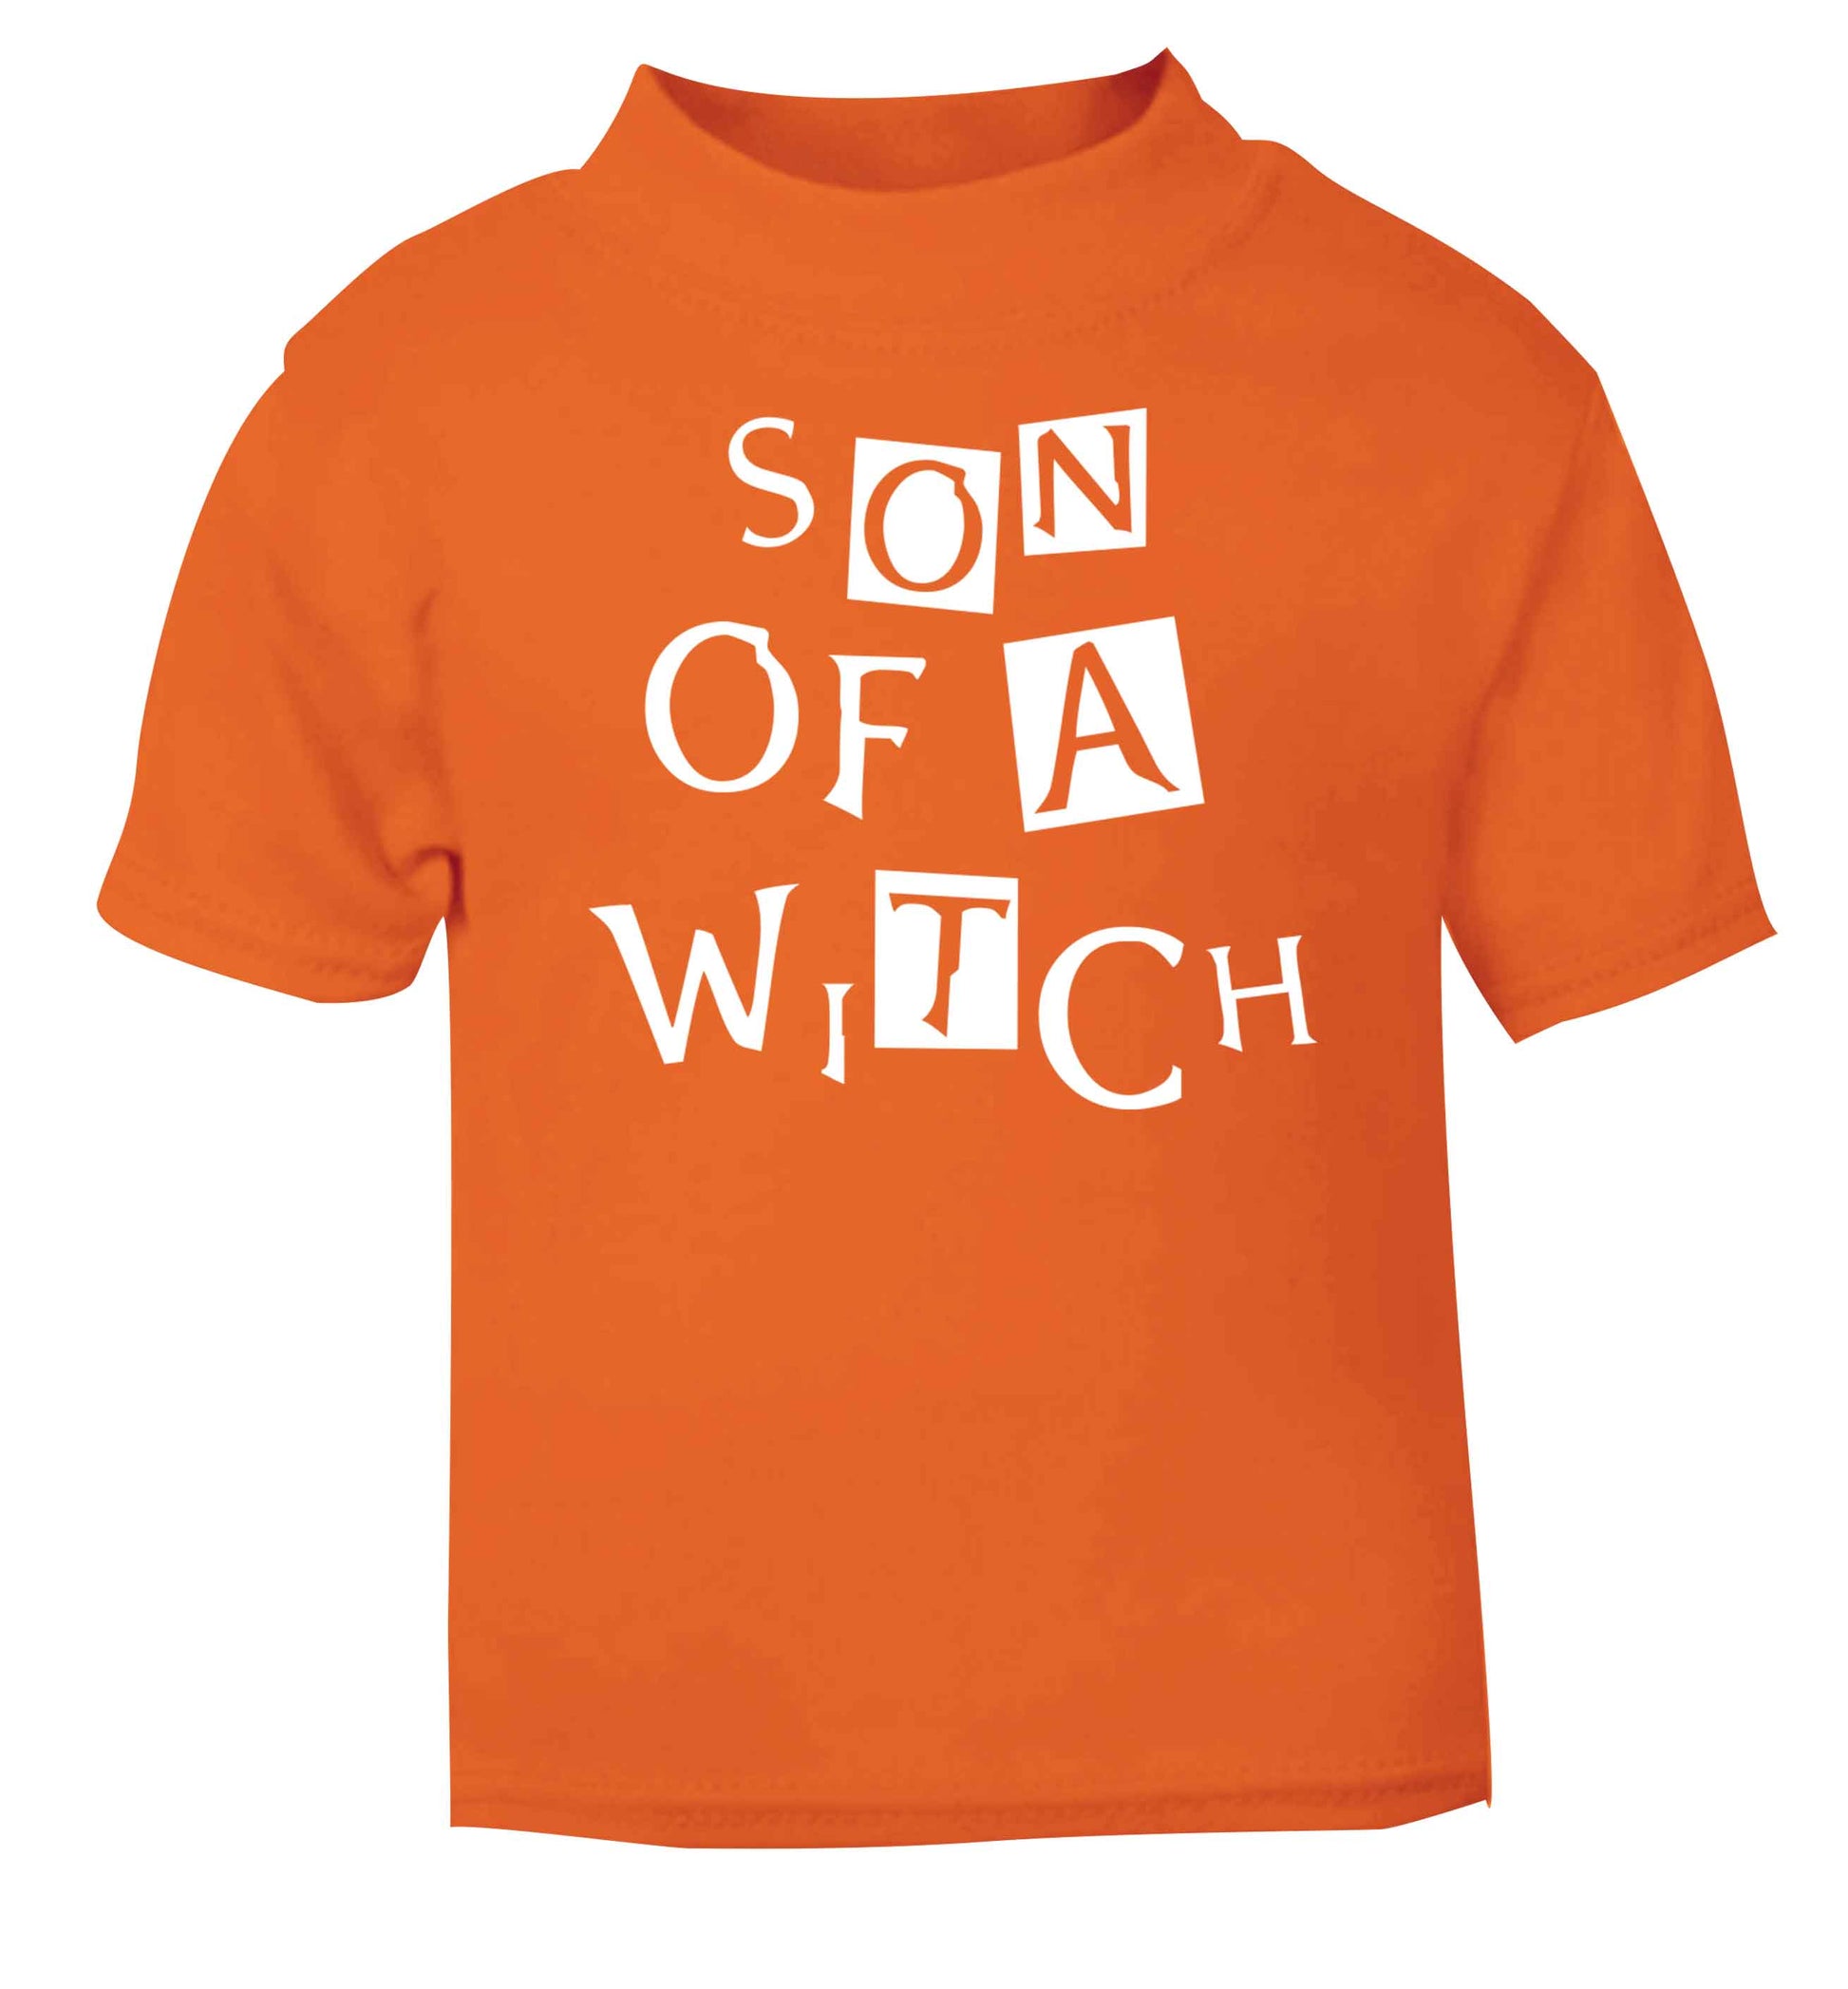 Son of a witch orange baby toddler Tshirt 2 Years